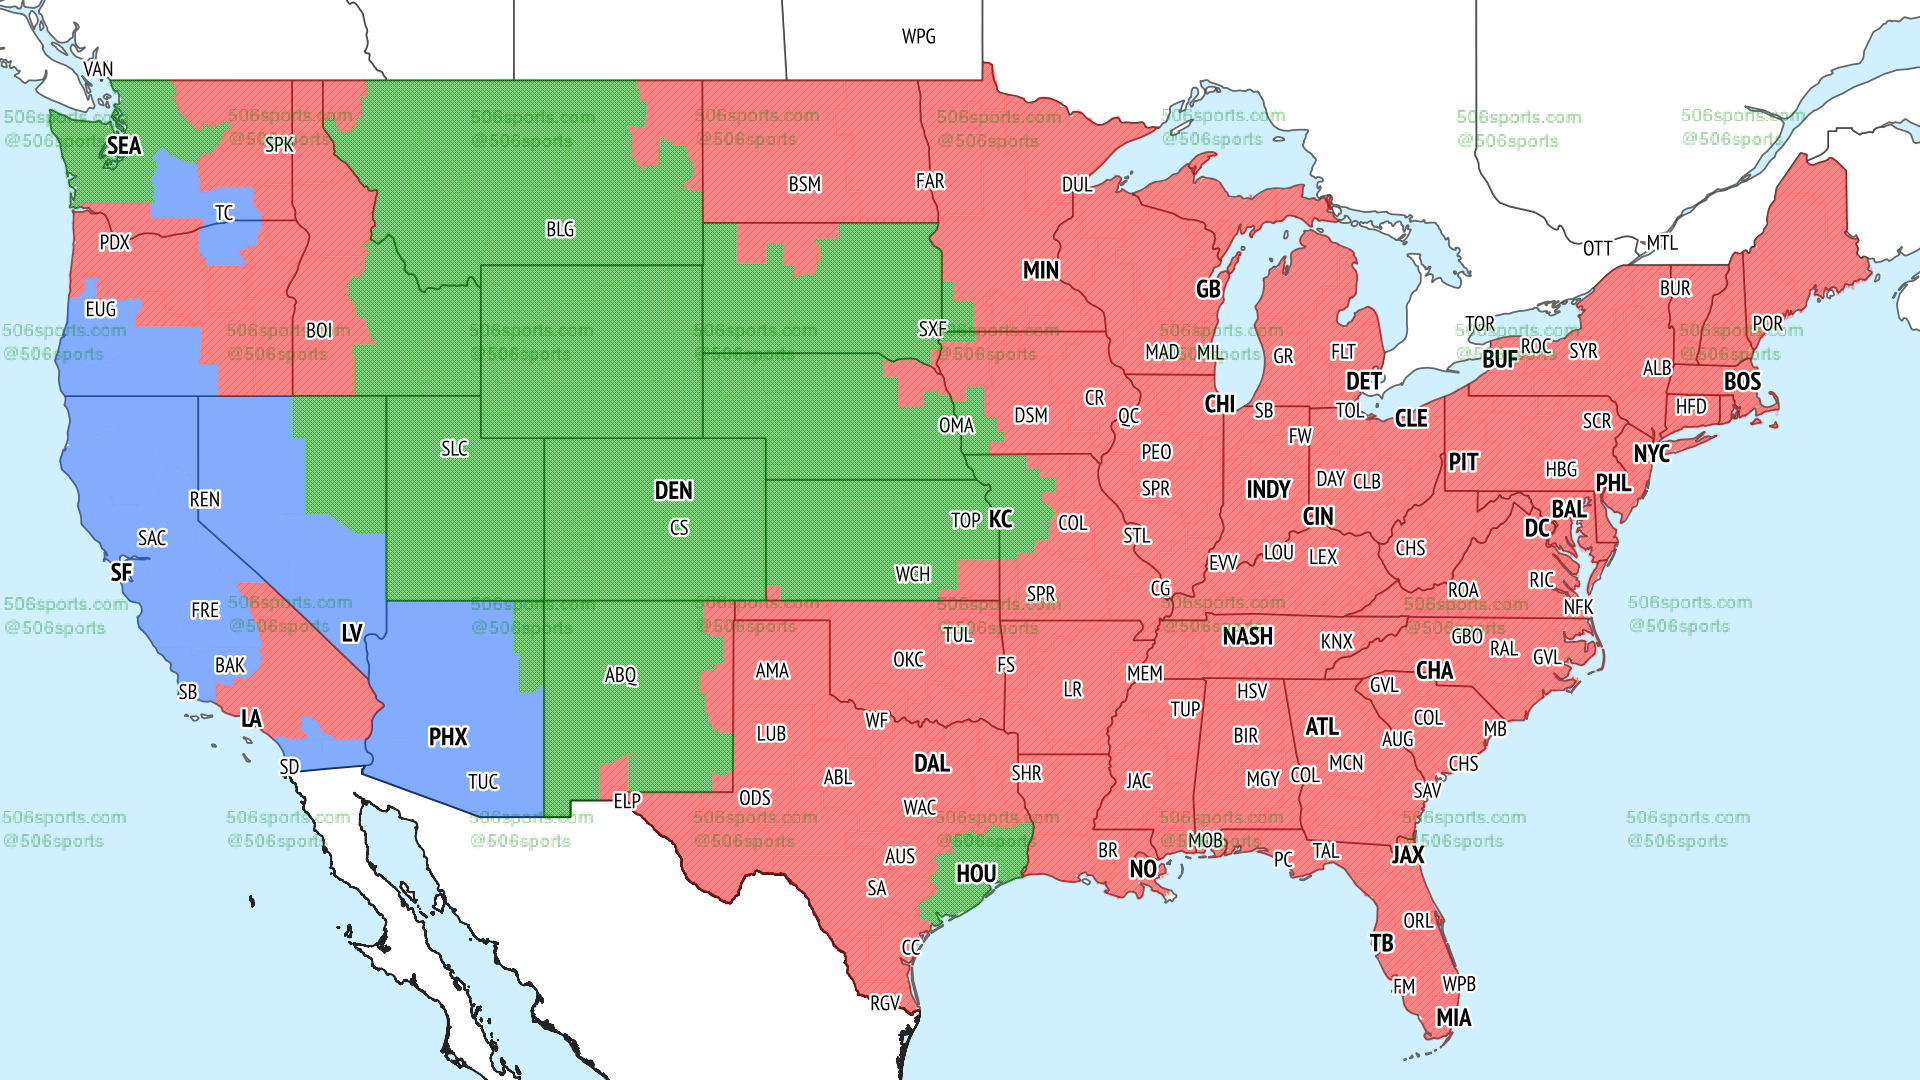 NFL on CBS Late Games Regional Tv Map for week 2 2022